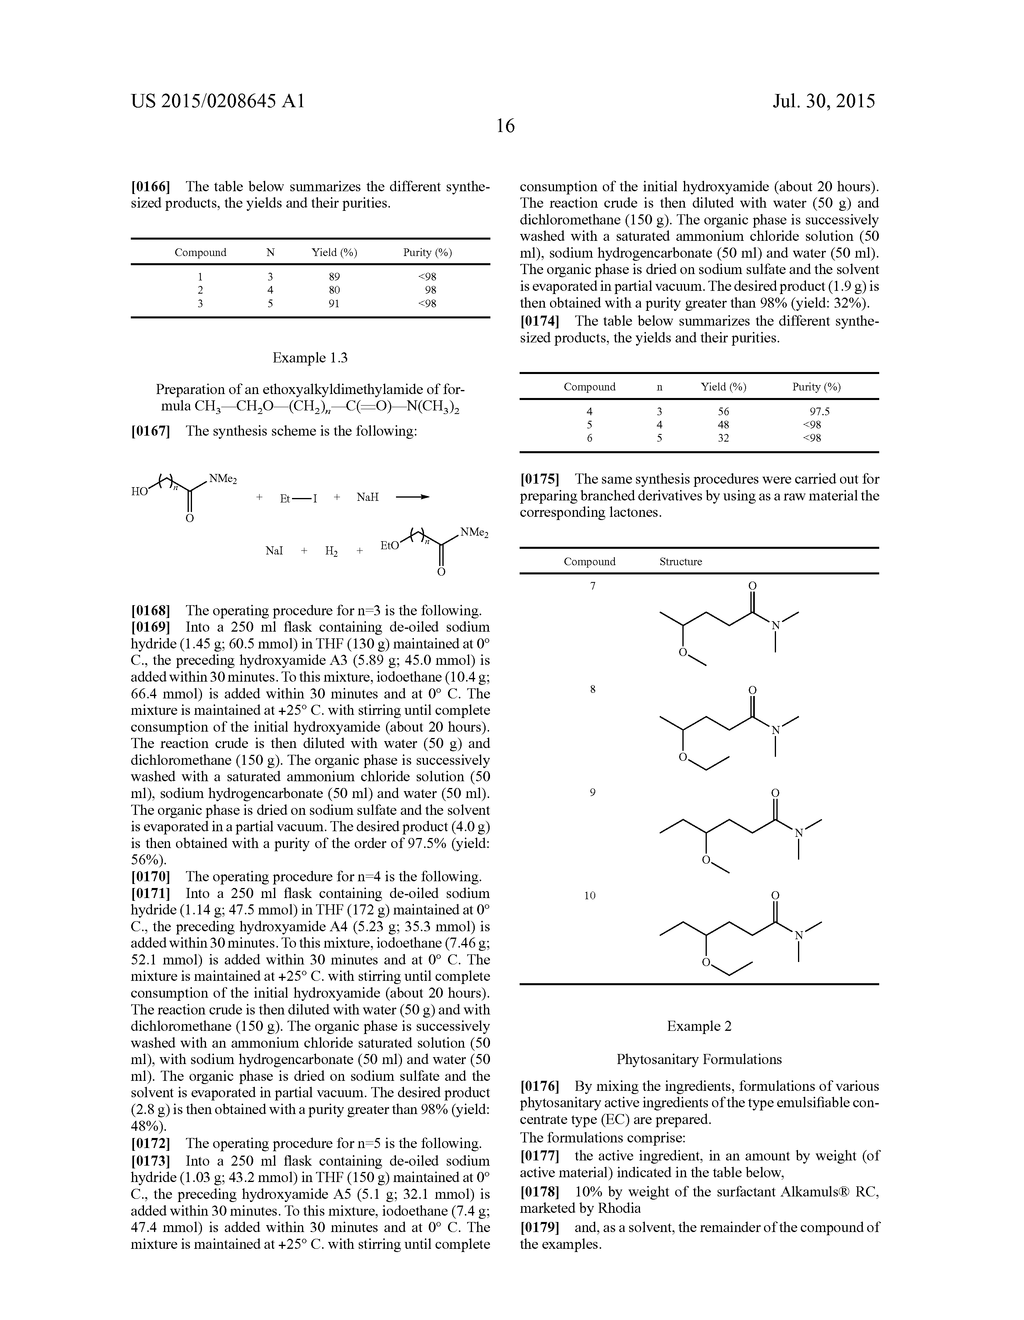 PHYTOSANITARY COMPOSITIONS COMPRISING AN ETHER-AMIDE COMPOUND - diagram, schematic, and image 17